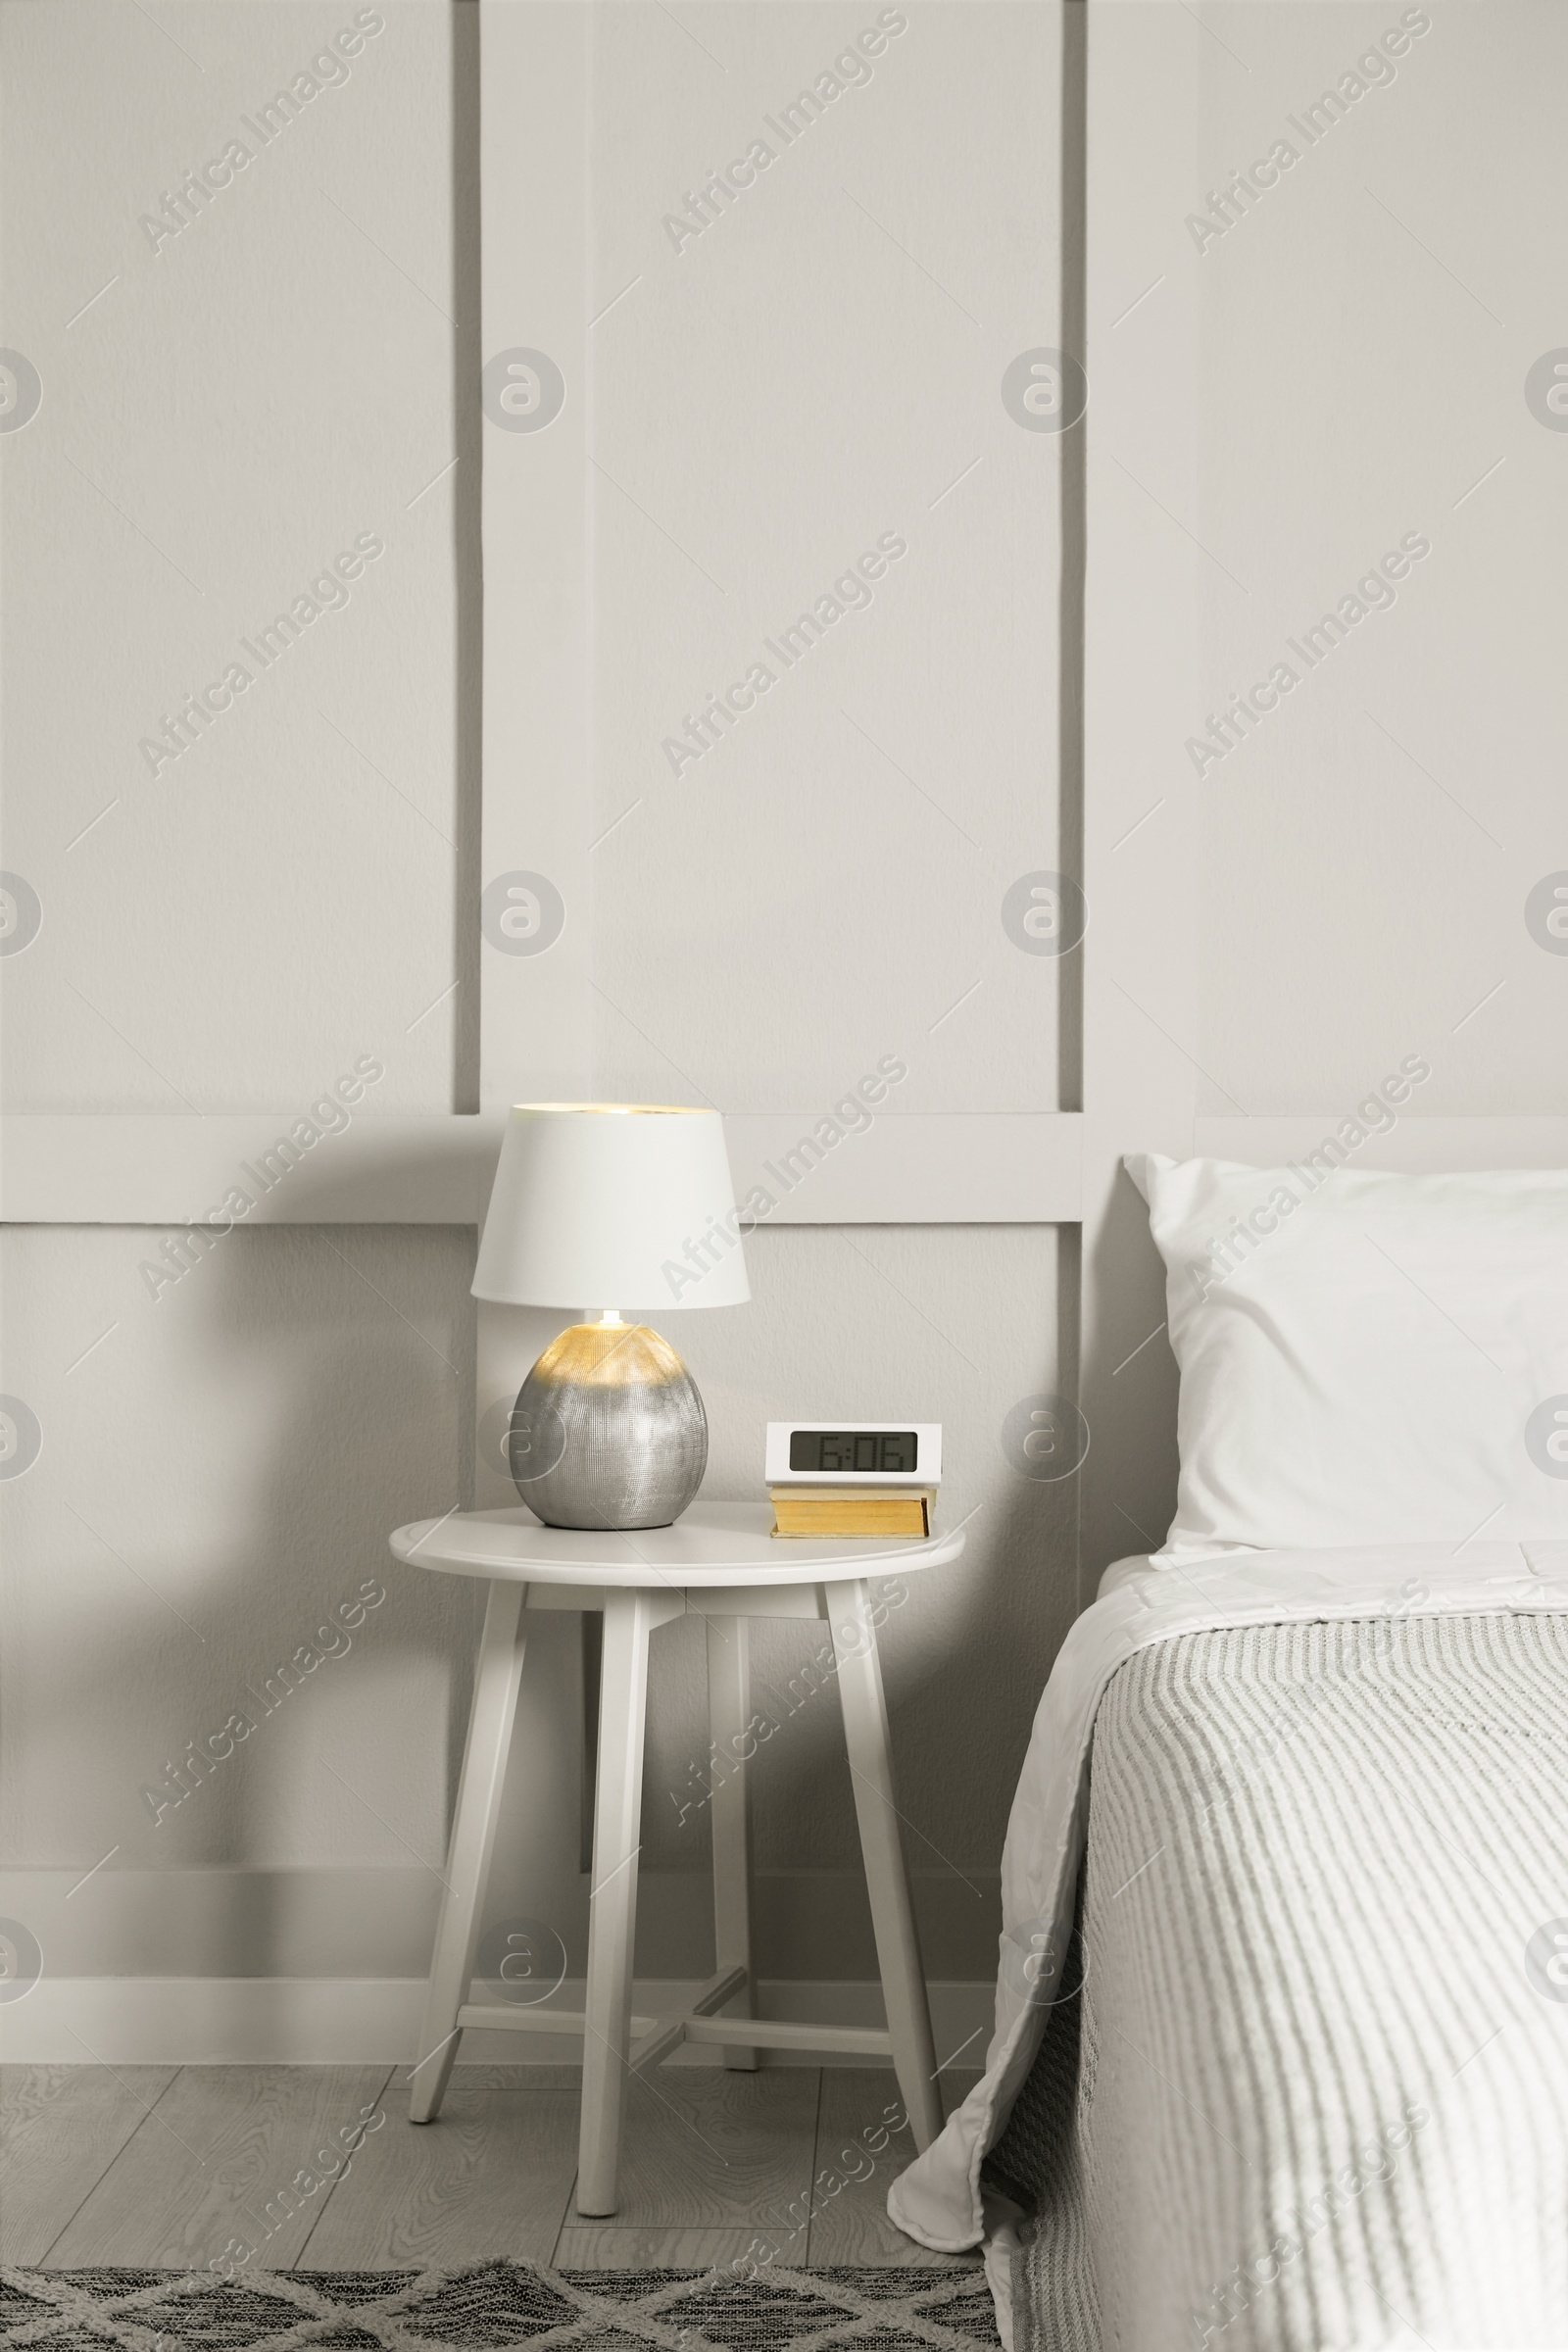 Photo of Stylish lamp, alarm clock and book on bedside table indoors. Bedroom interior elements